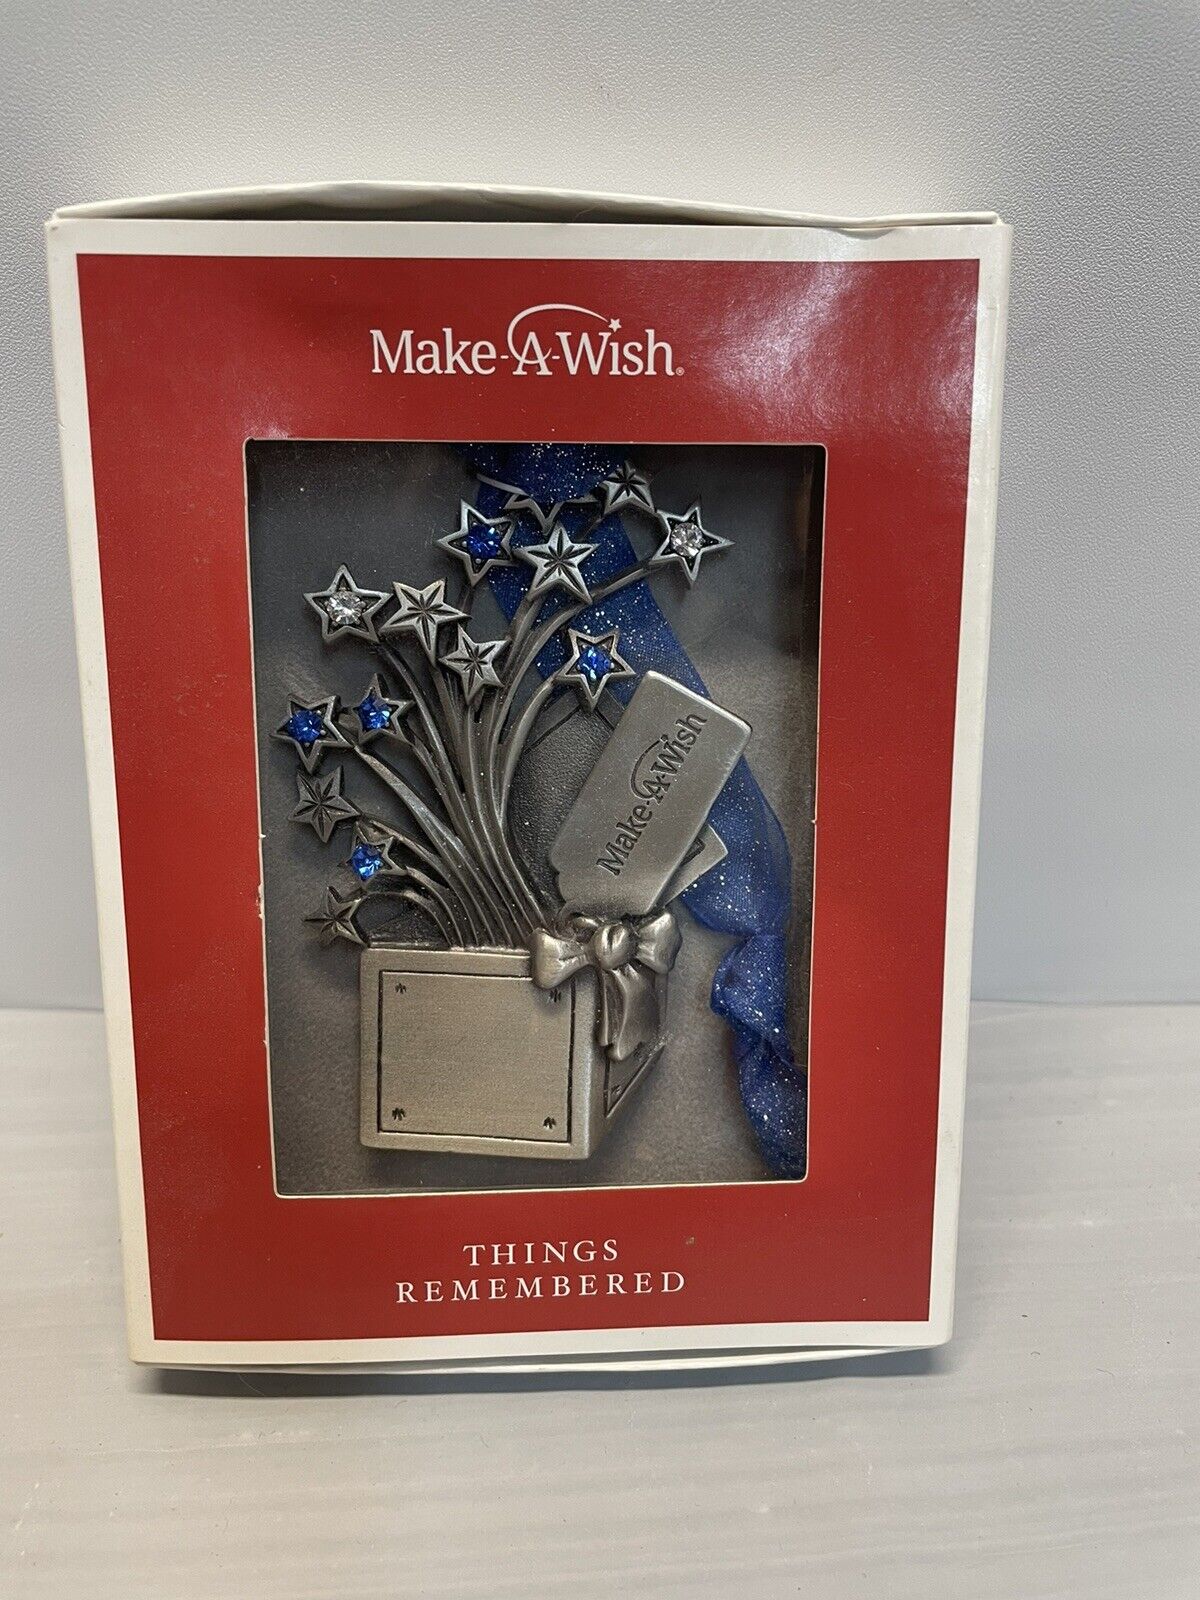 Things Remembered Make A Wish 1997 Pewter Ornament 3.5” Present